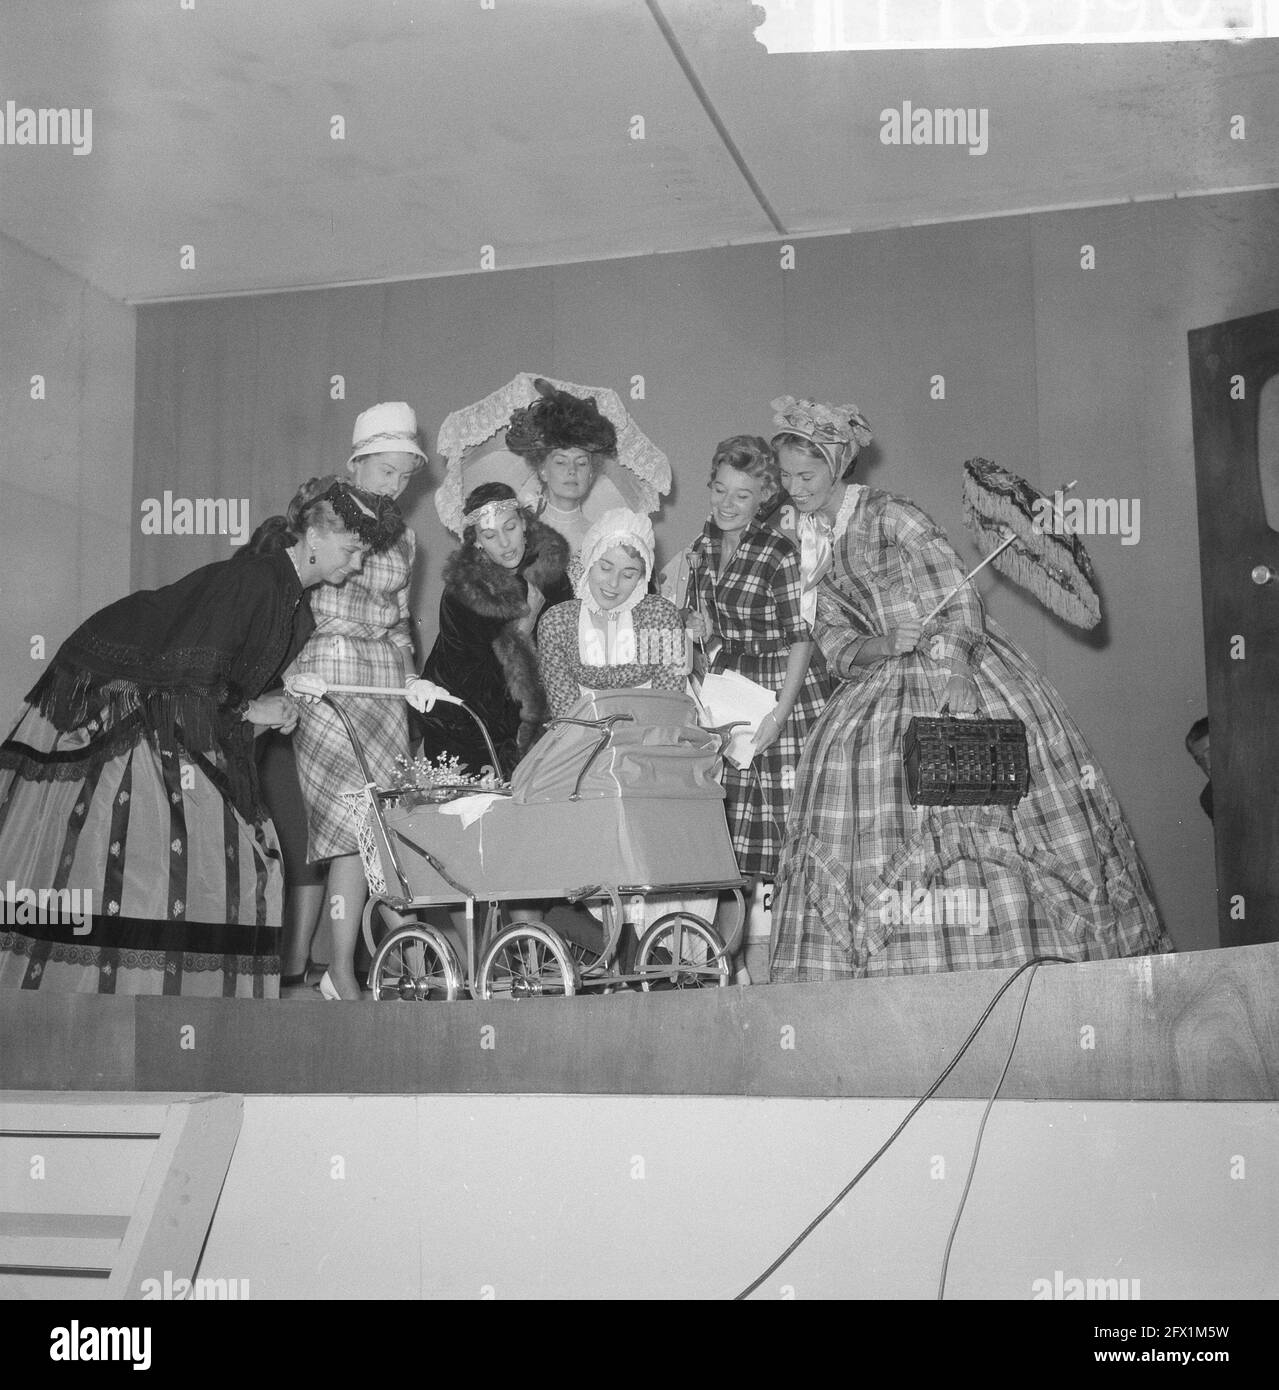 Costume show for the opening of the Femina Household Fair Rotterdam, from left to right B. Brandenburg, K. Kraaykamp, T. Koen, V. Dixon, E. Mooy and H. Lips, September 30, 1960, openings, The Netherlands, 20th century press agency photo, news to remember, documentary, historic photography 1945-1990, visual stories, human history of the Twentieth Century, capturing moments in time Stock Photo